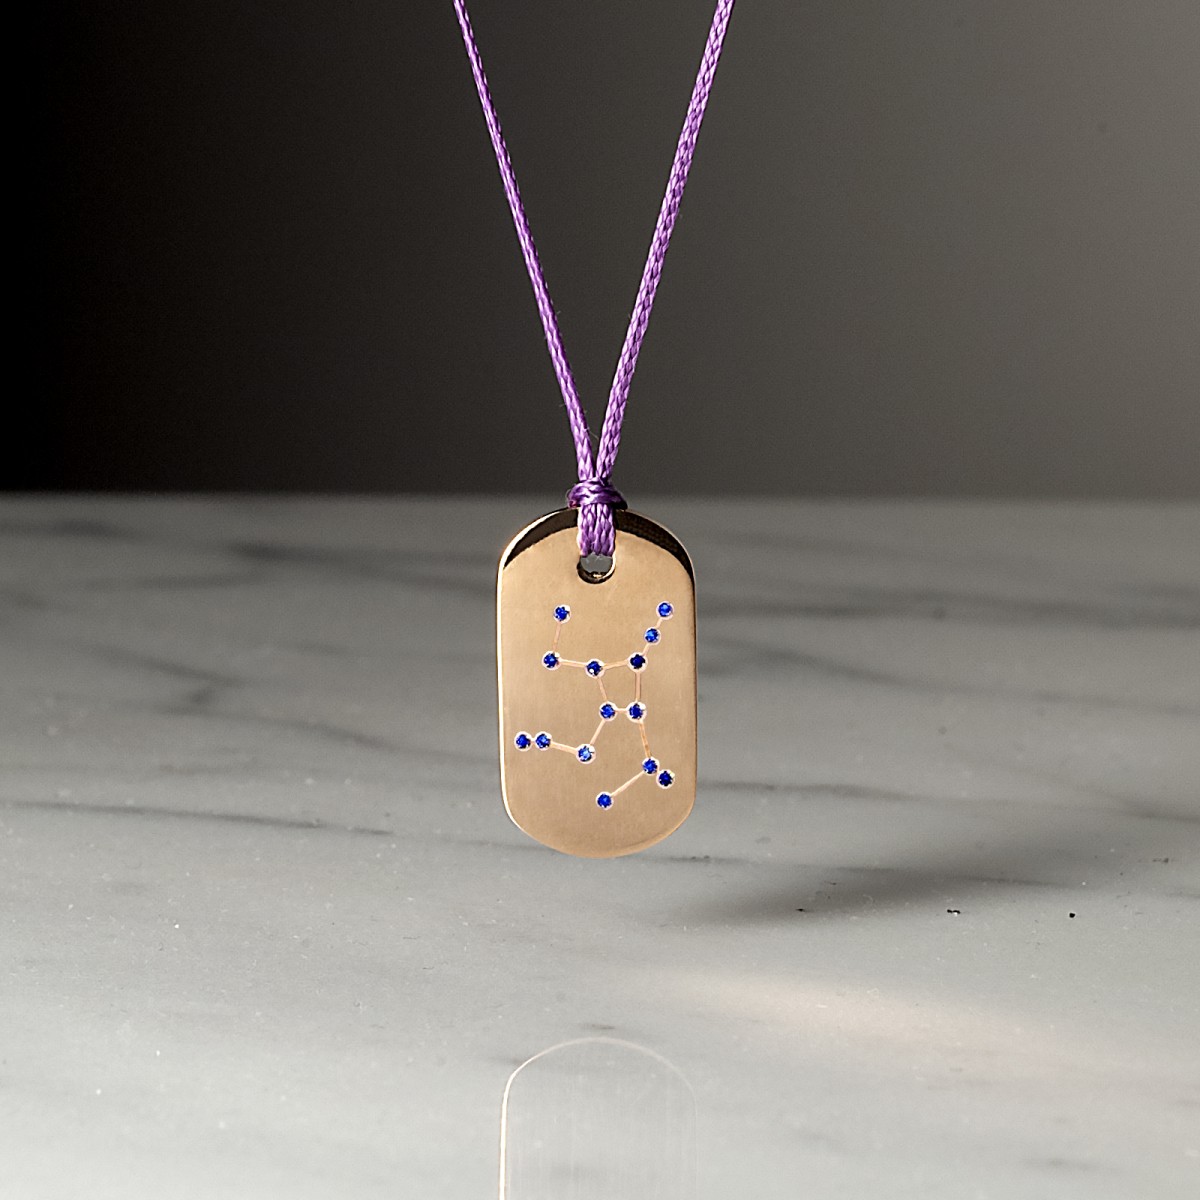 VOUS ETES VIERGE - Necklace handcrafted by the Hervé Domar workshop